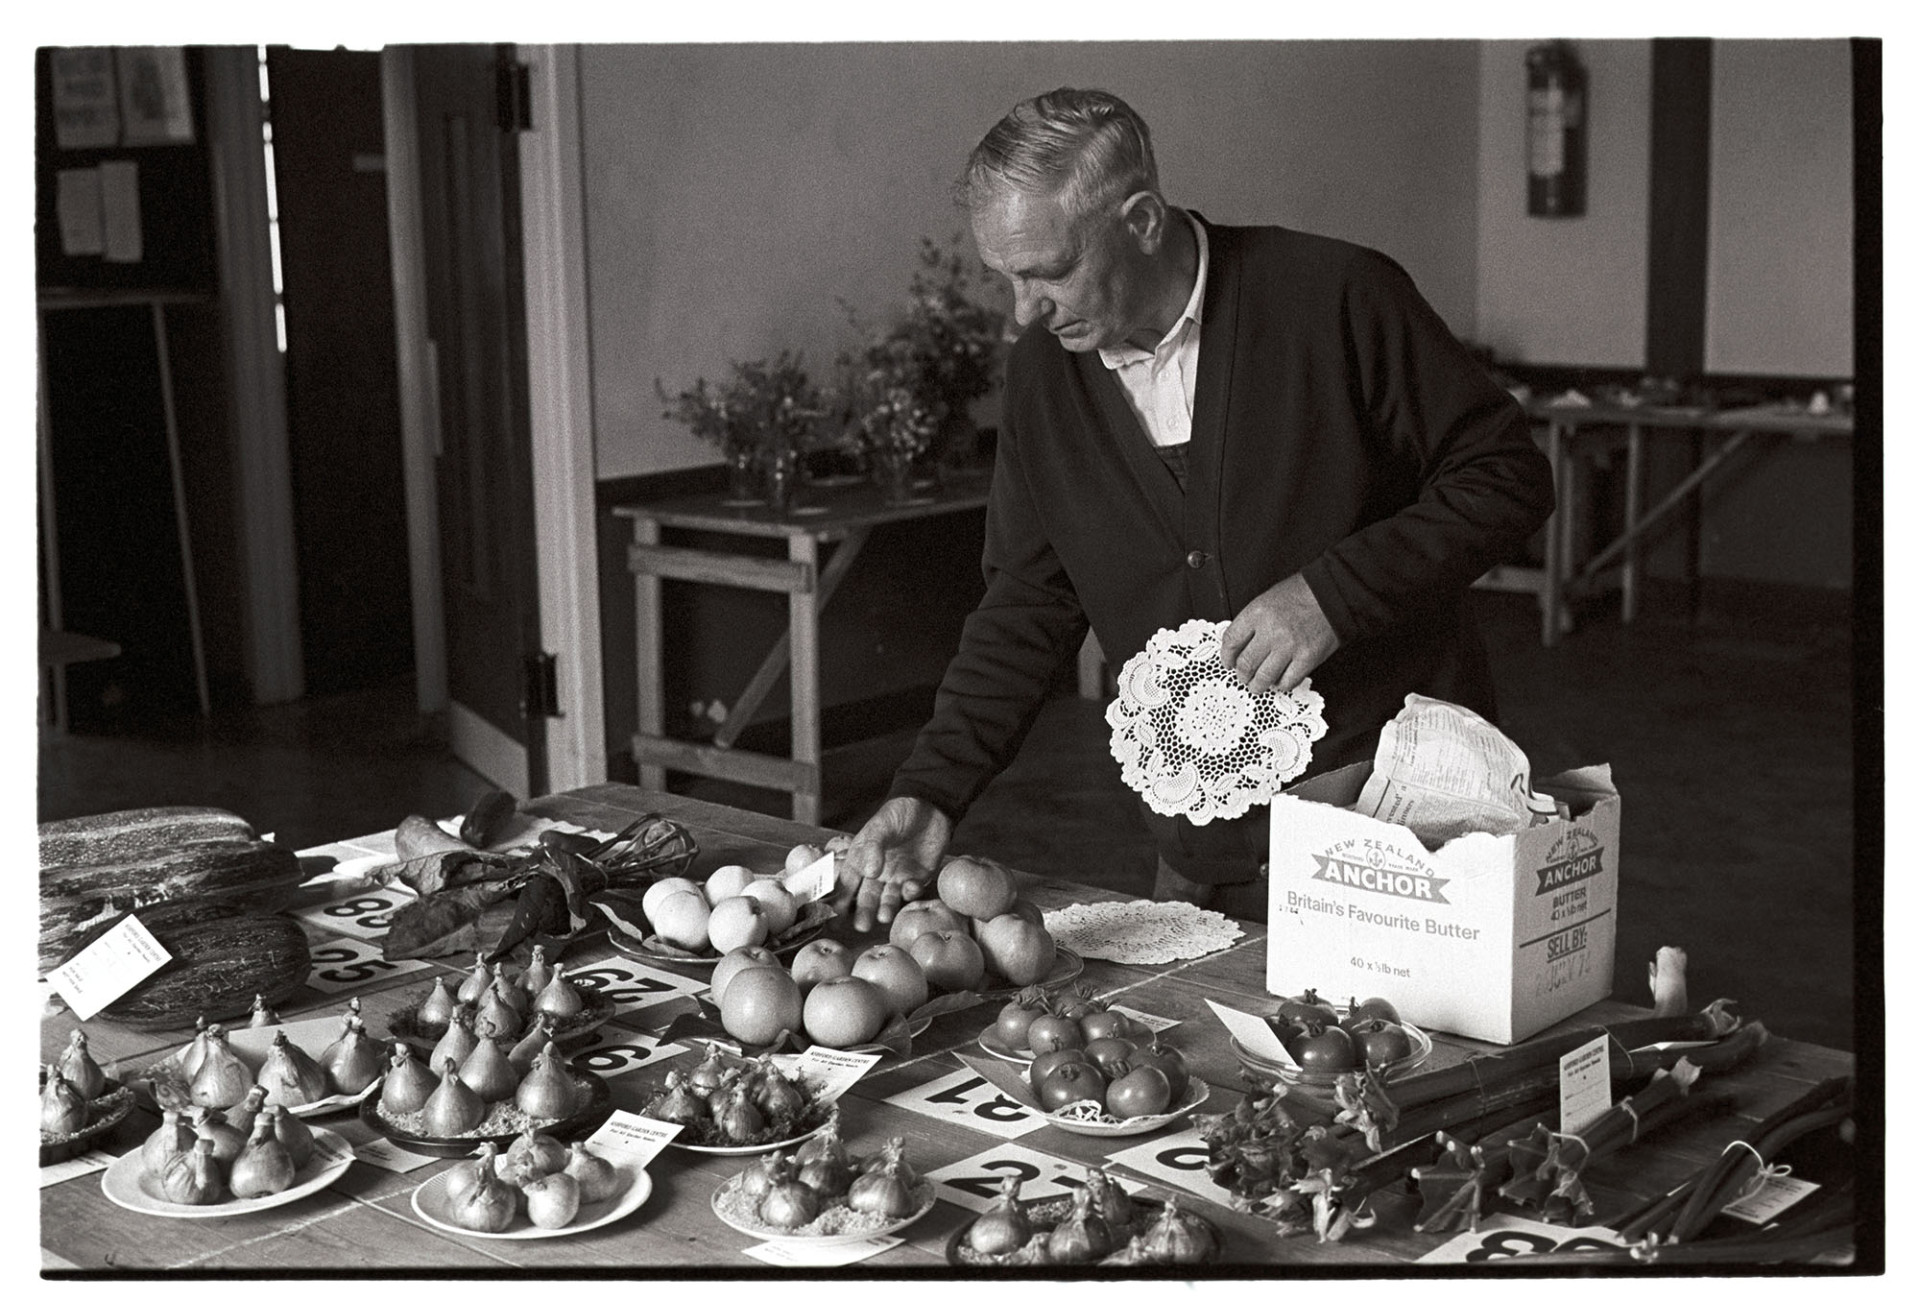 Man laying out produce at Flower Show in village Hall. Fruit, vegetables.
[Philip George holding a doily and laying out produce at the Flower Show in Dolton Village Hall. Onions, apples, marrows and rhubarb are visible on the table.]